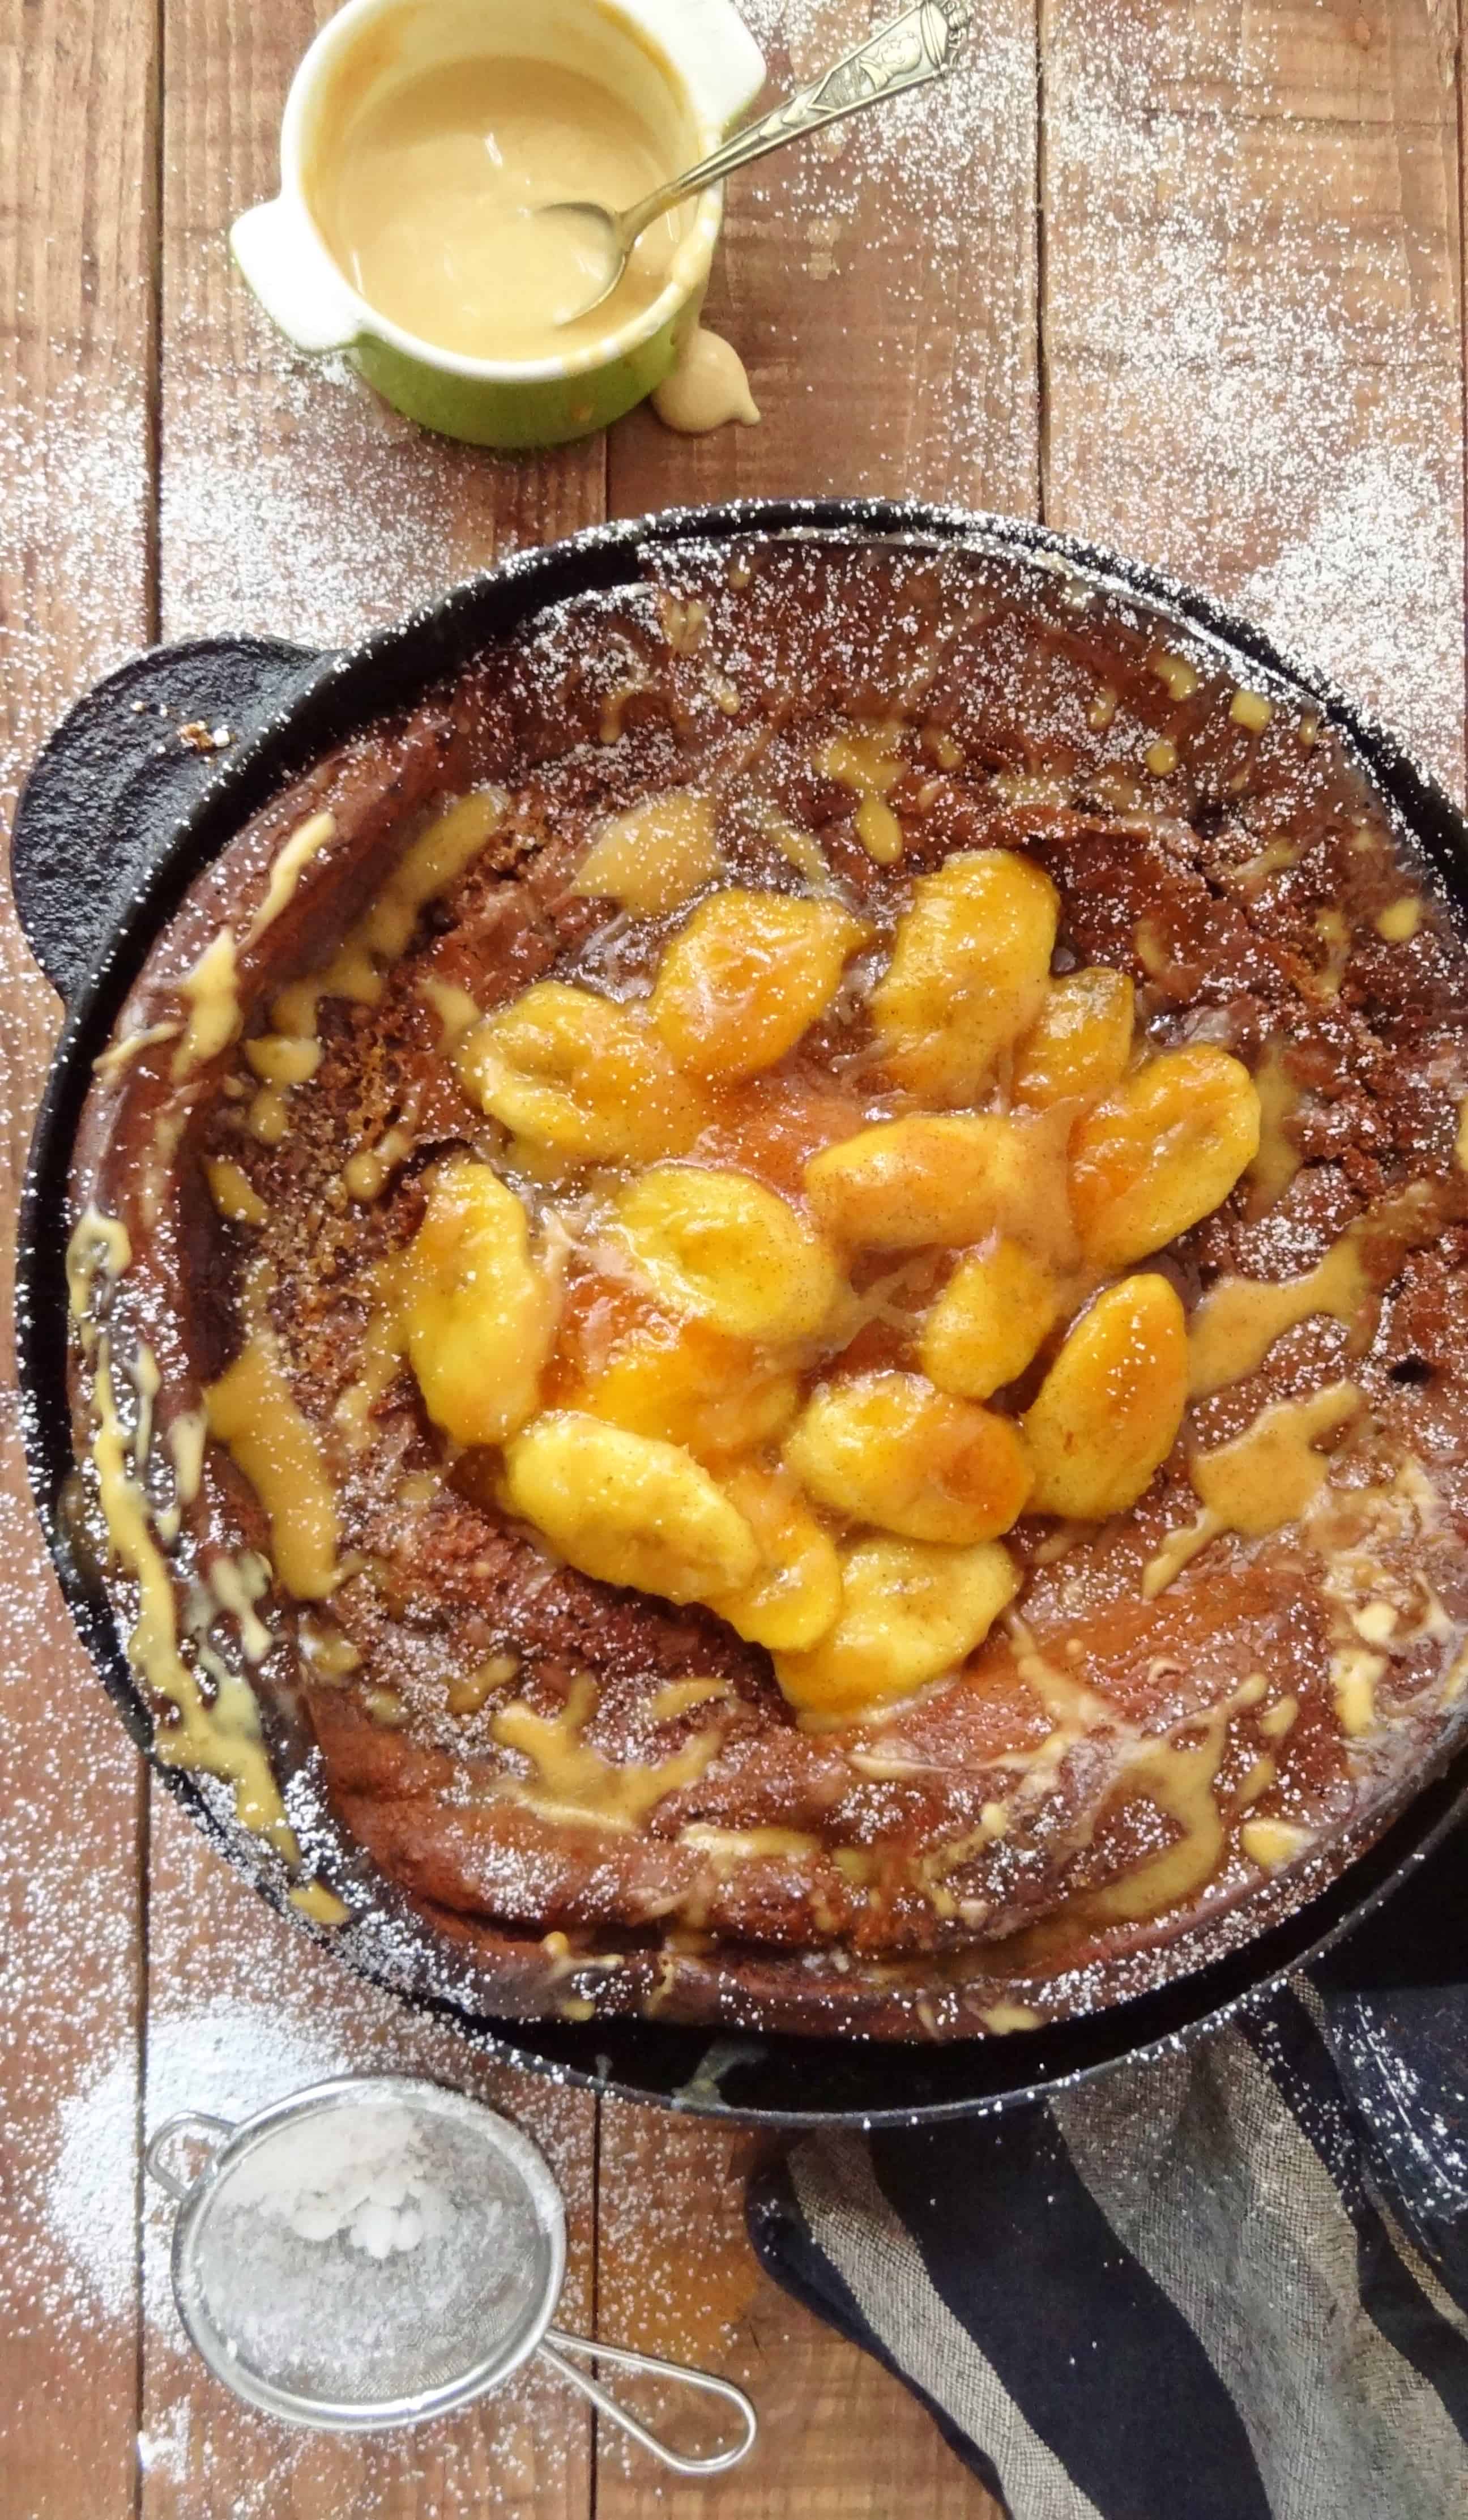 spiced chocolate dutch baby pancake with caramelised bananas and peanut butter drizzle